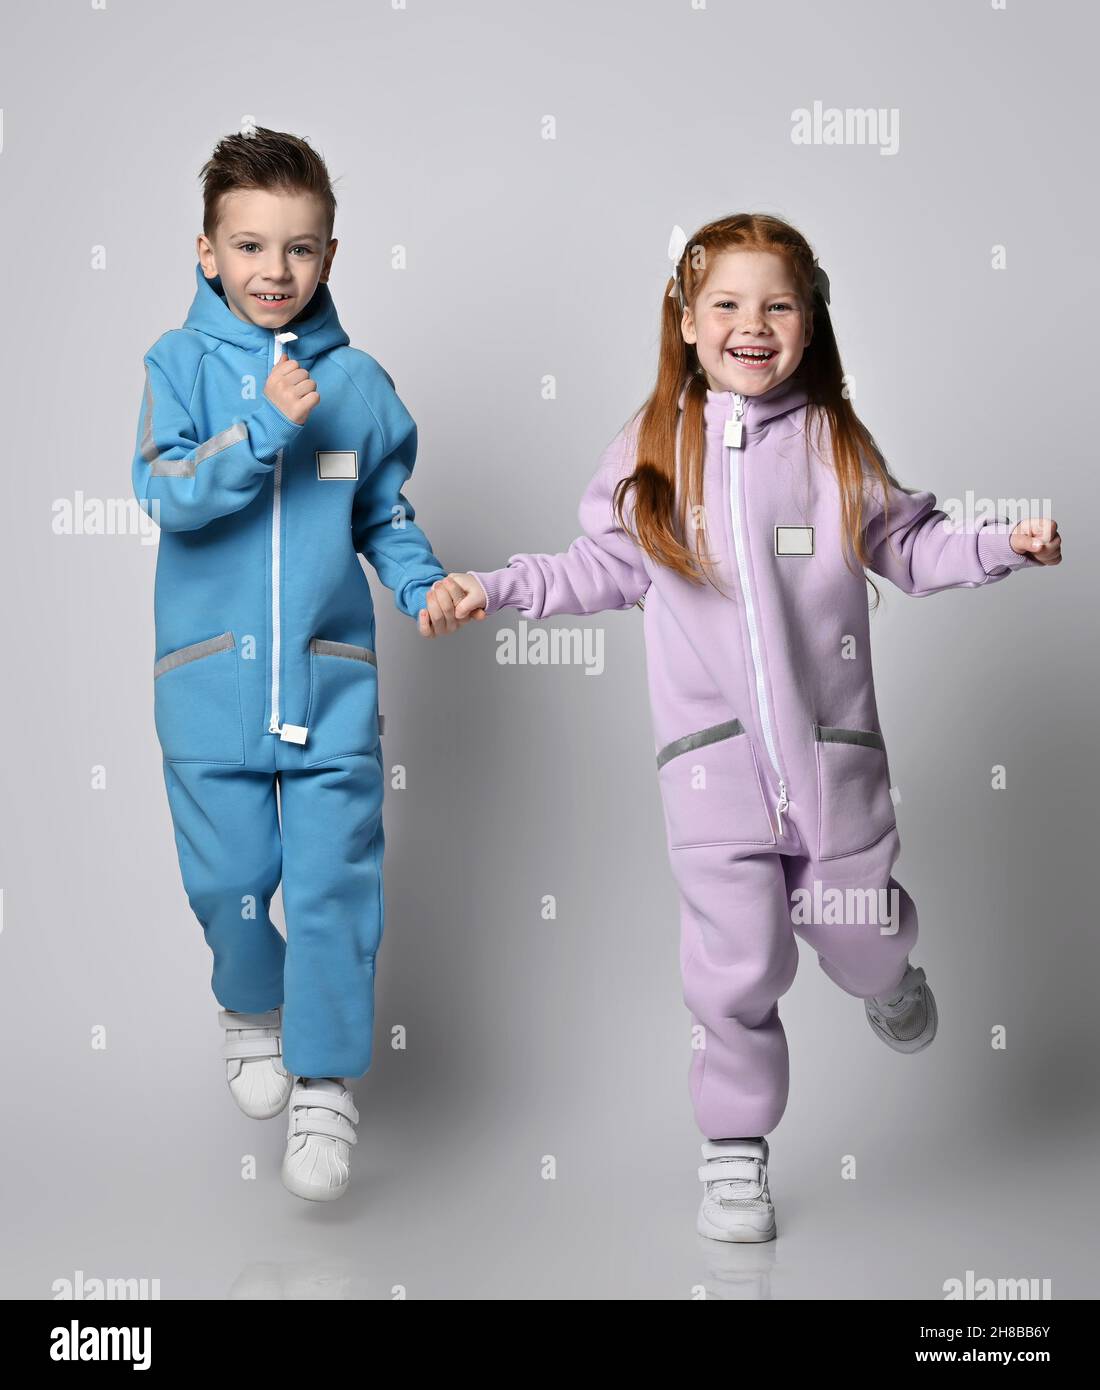 Playful kids boy and girl in blue and pink jumpsuits with zippers and pockets are jumping and having fun together Stock Photo